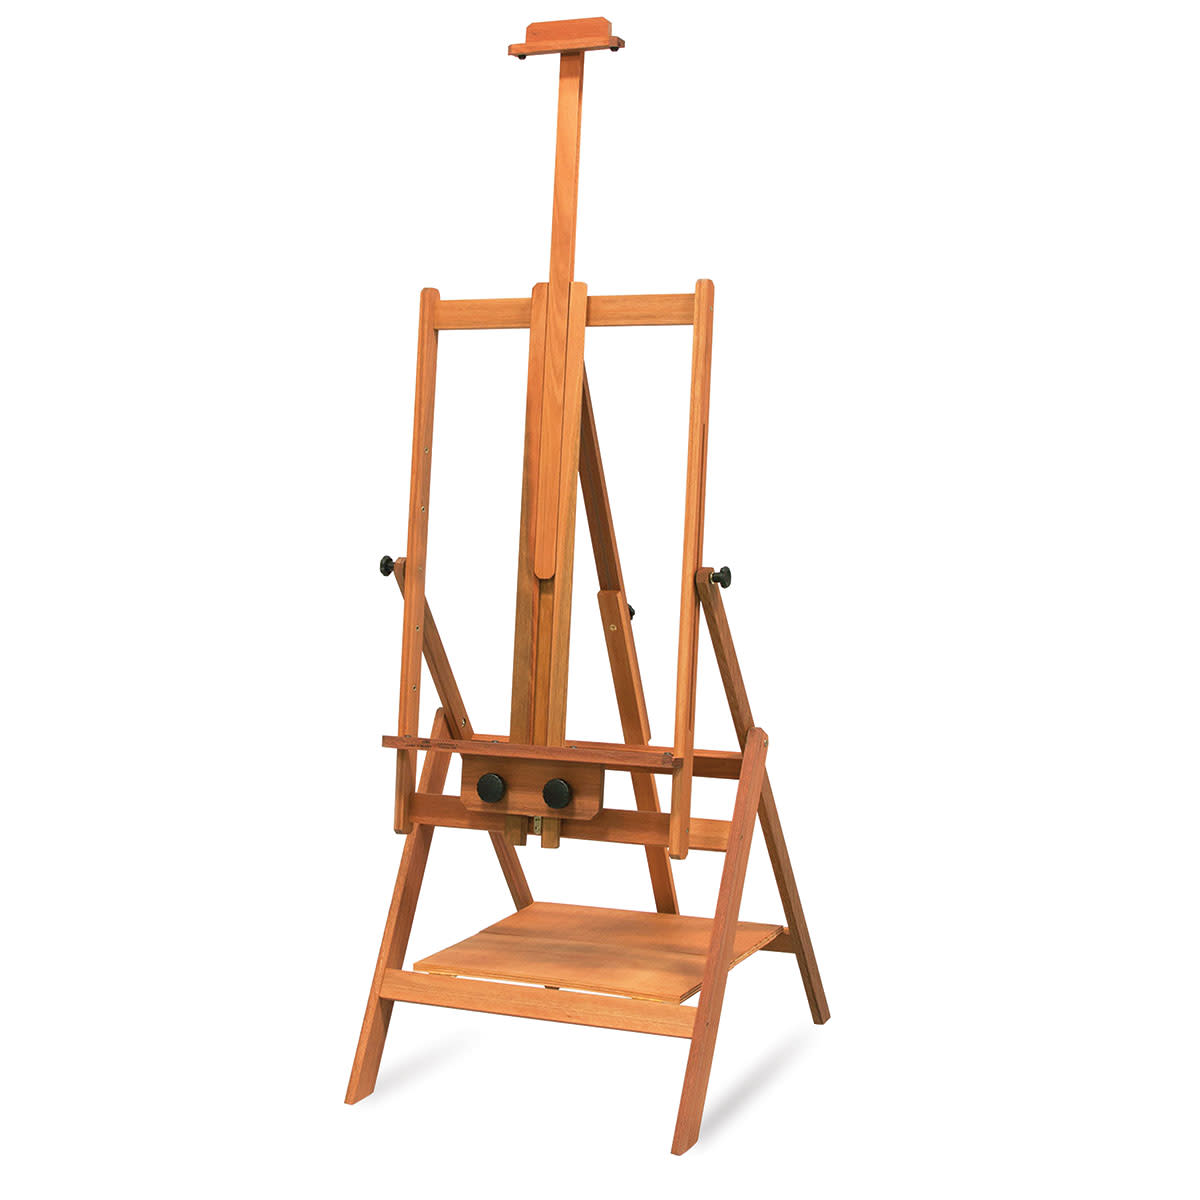 Weston Full French Easel (Jack Richeson)